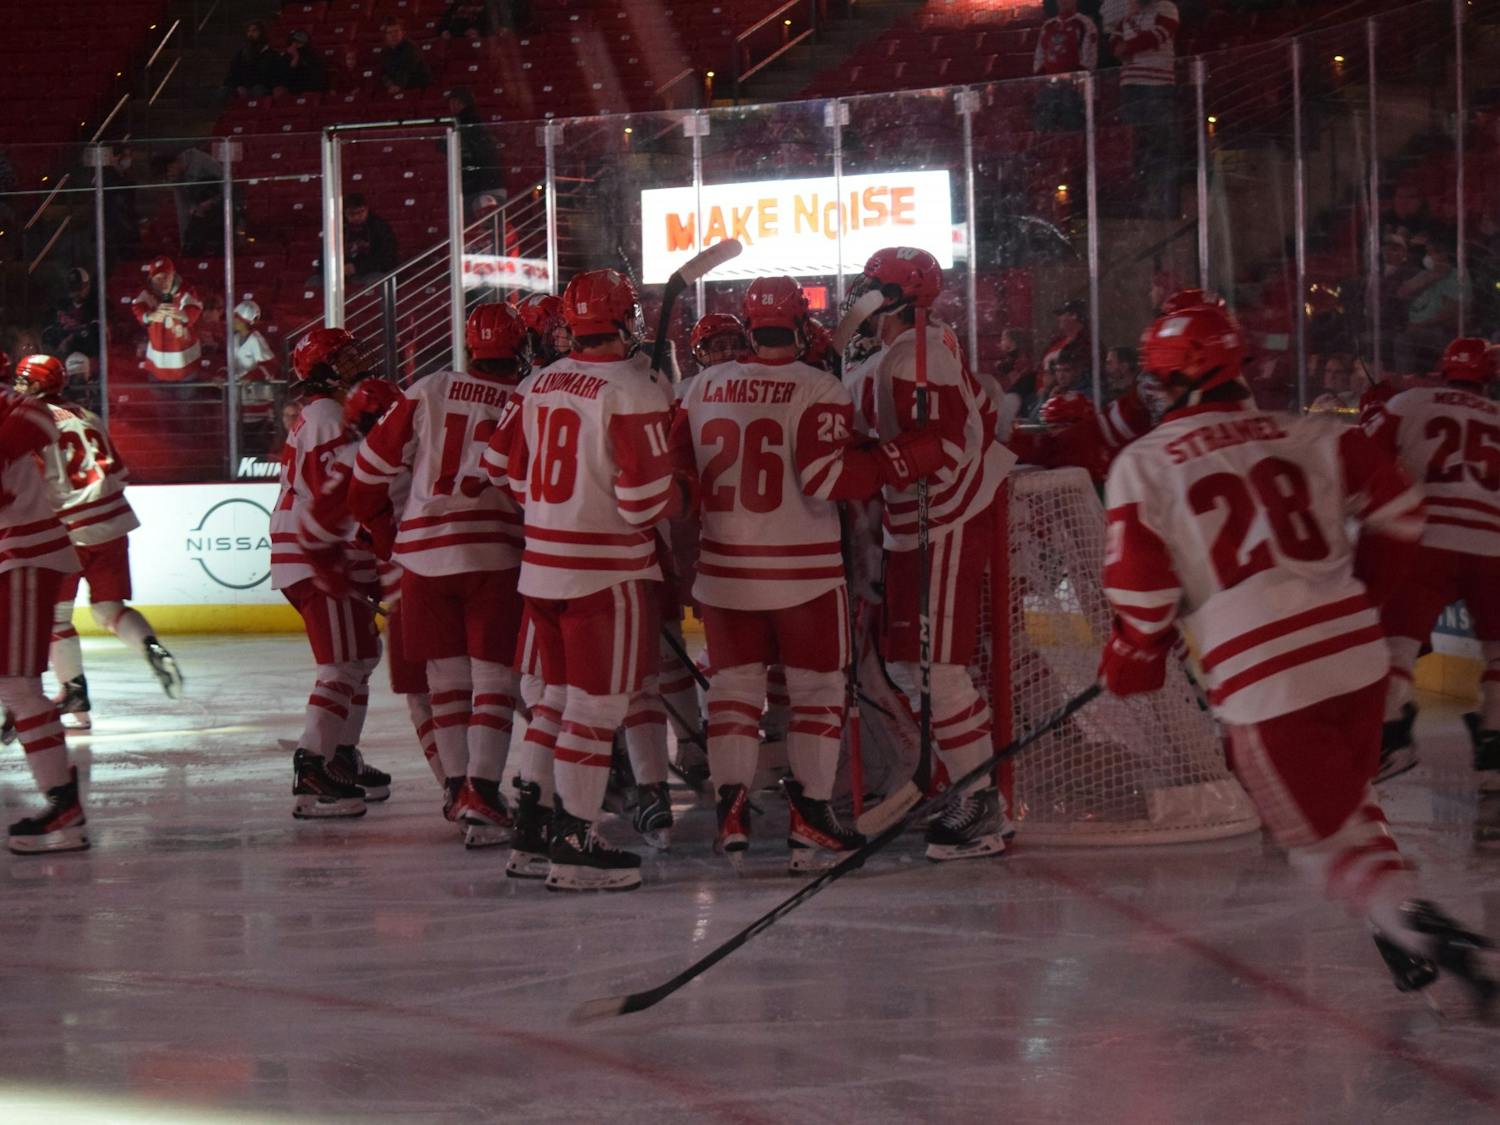 PHOTOS: Wisconsin Men's Hockey loses to Penn State 1-2